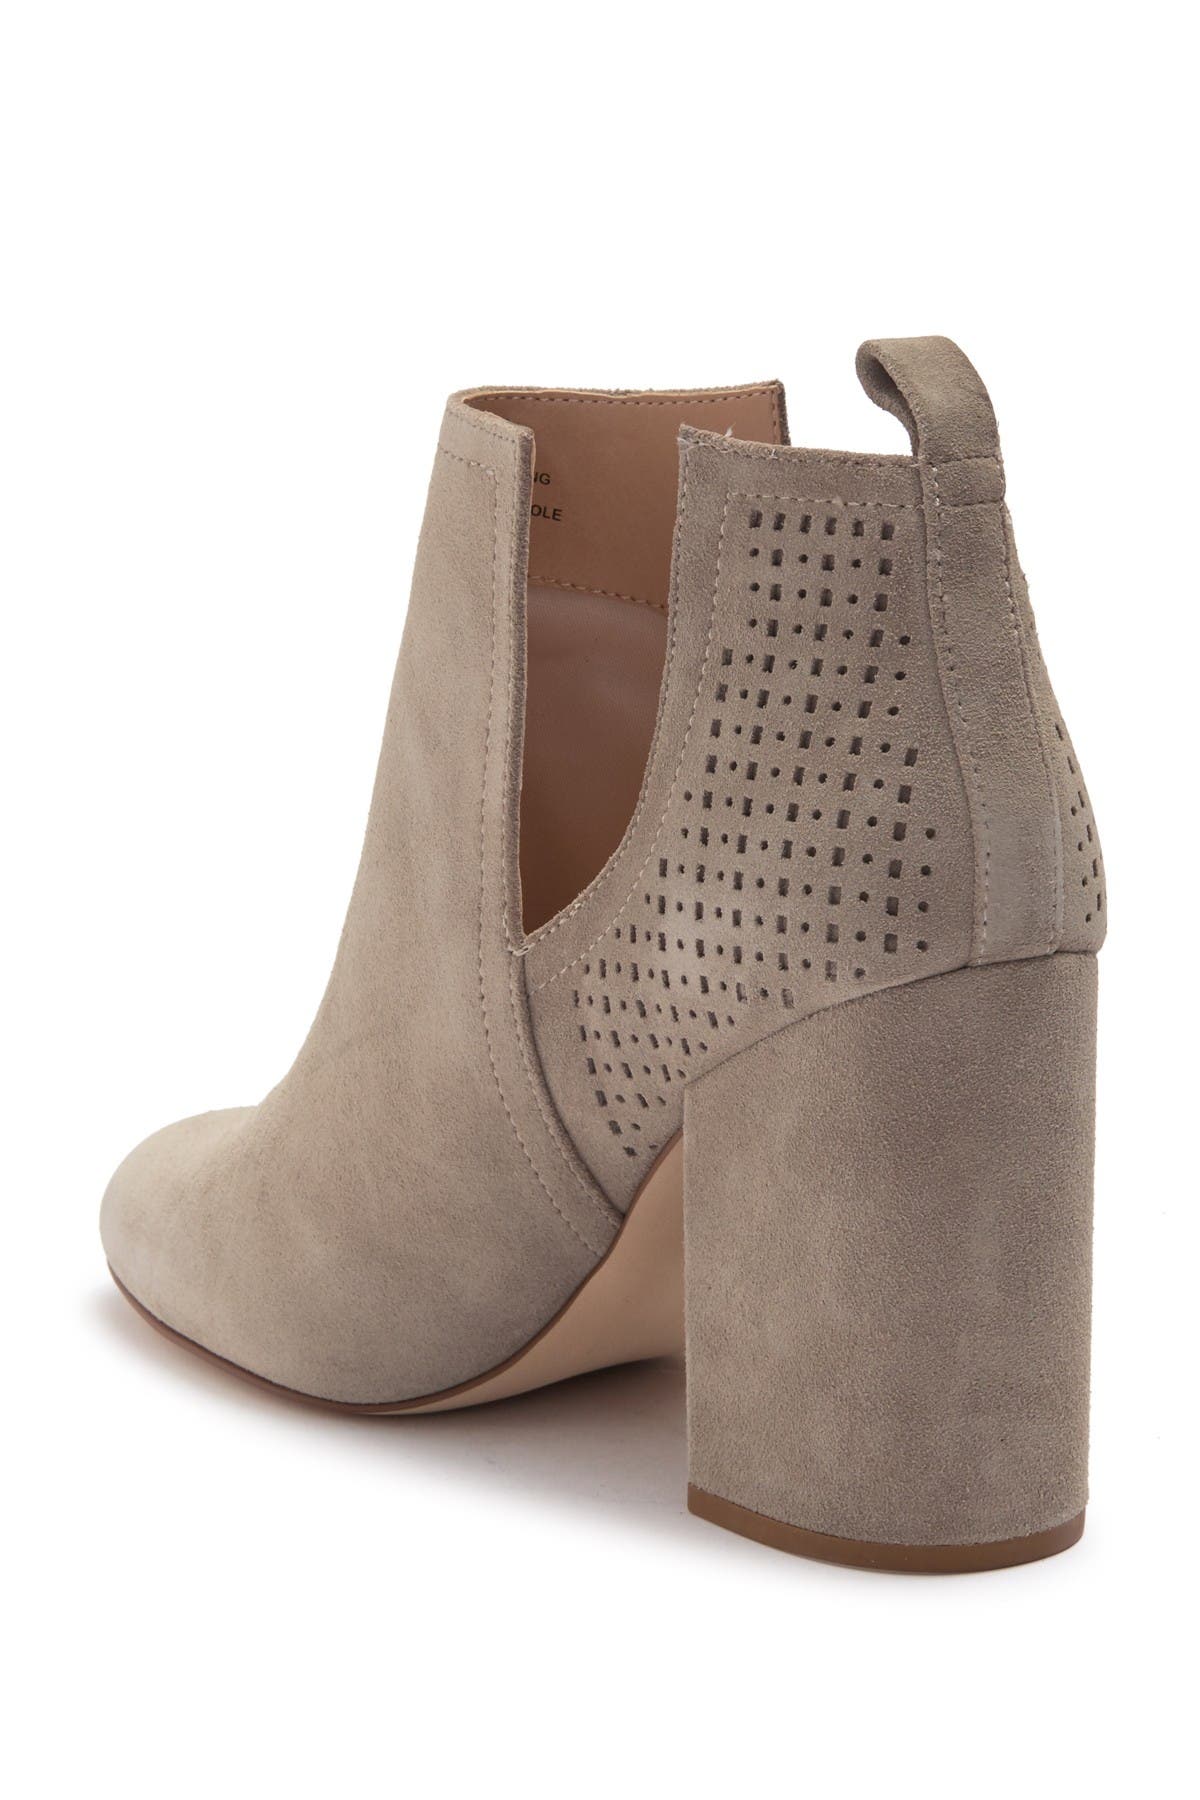 Norelle Perforated Suede Ankle Boot 